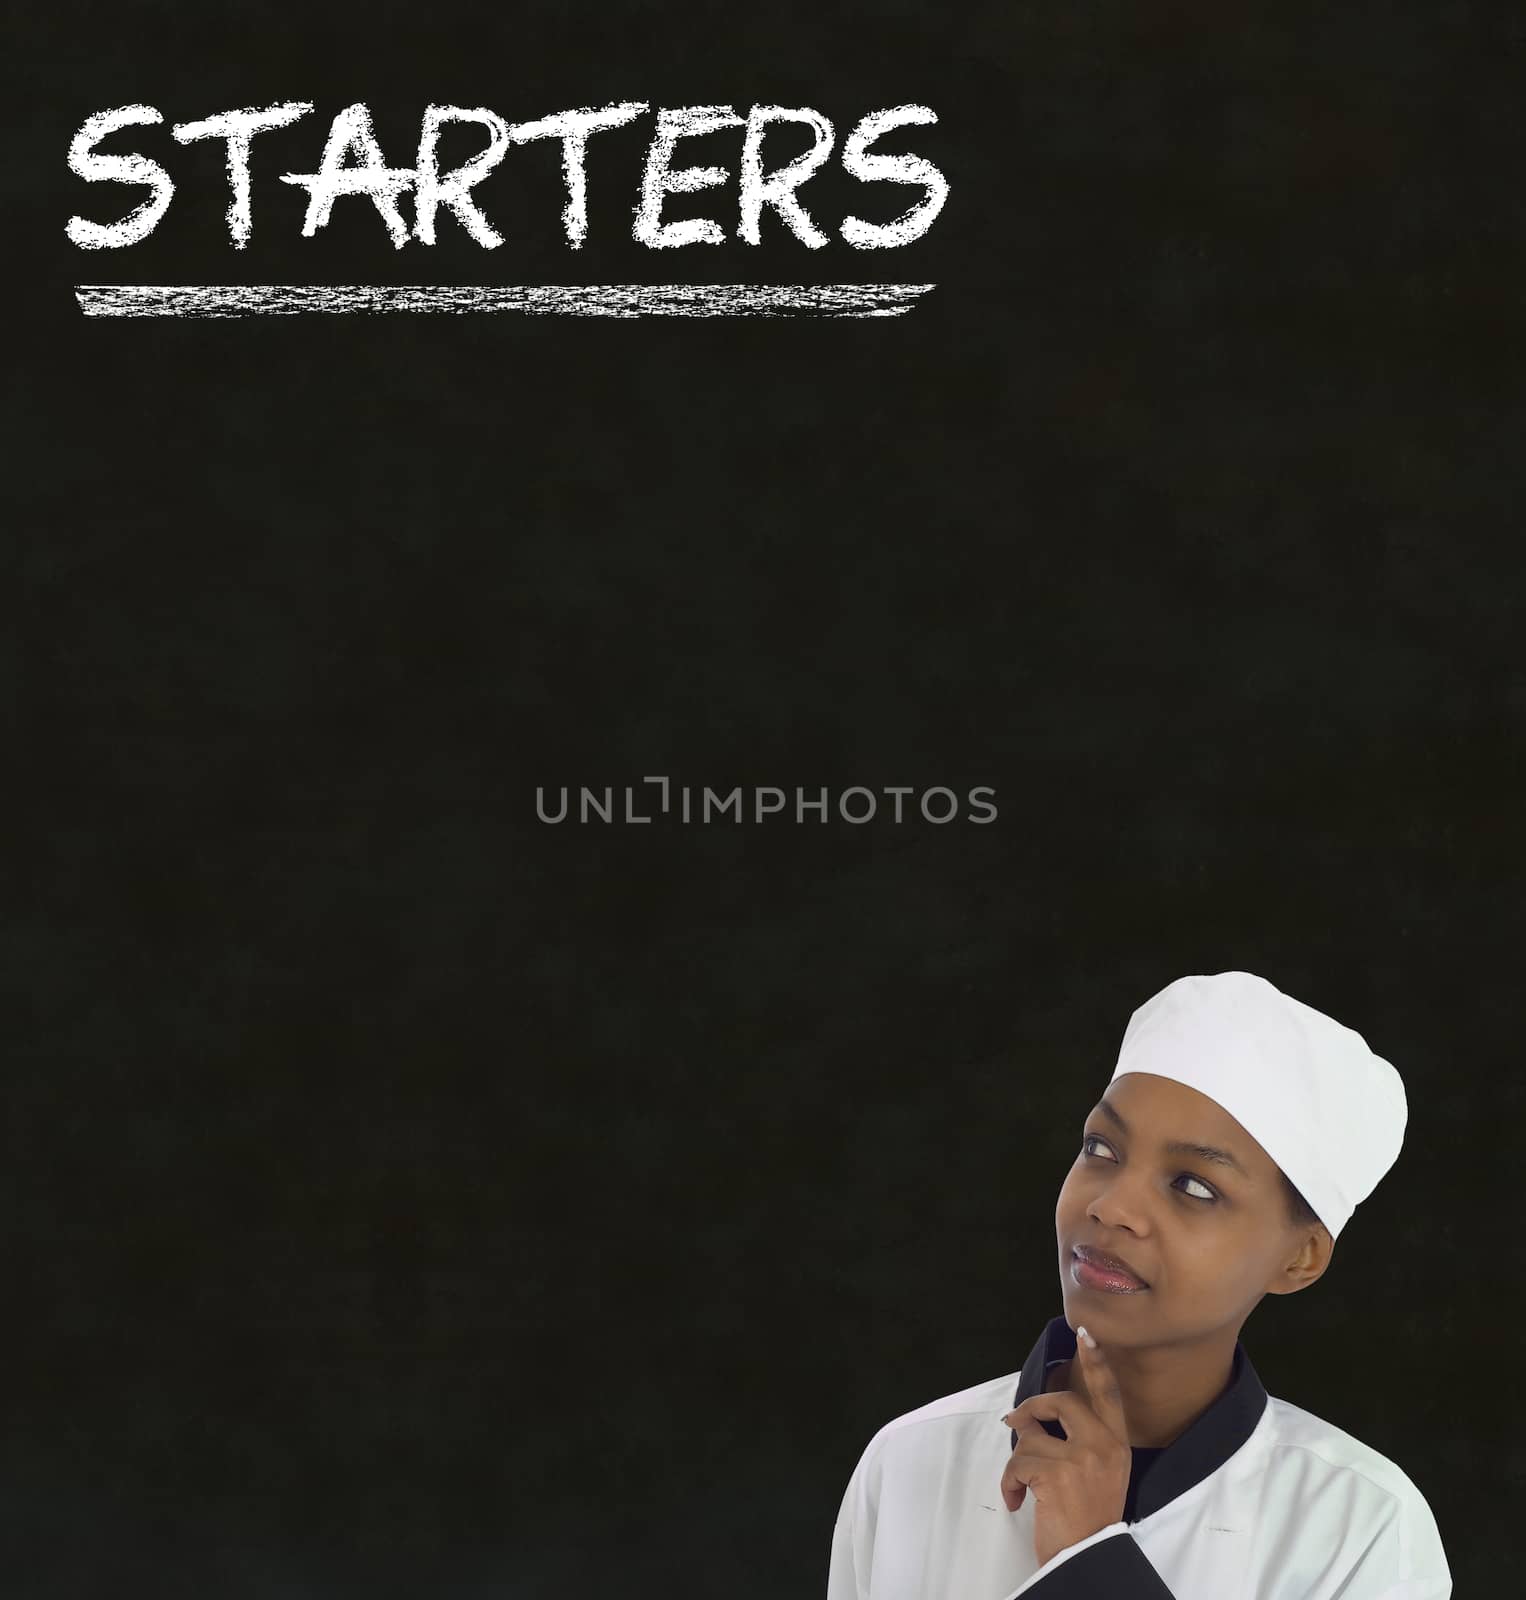 Chef with chalk starters sign written on blackboard background